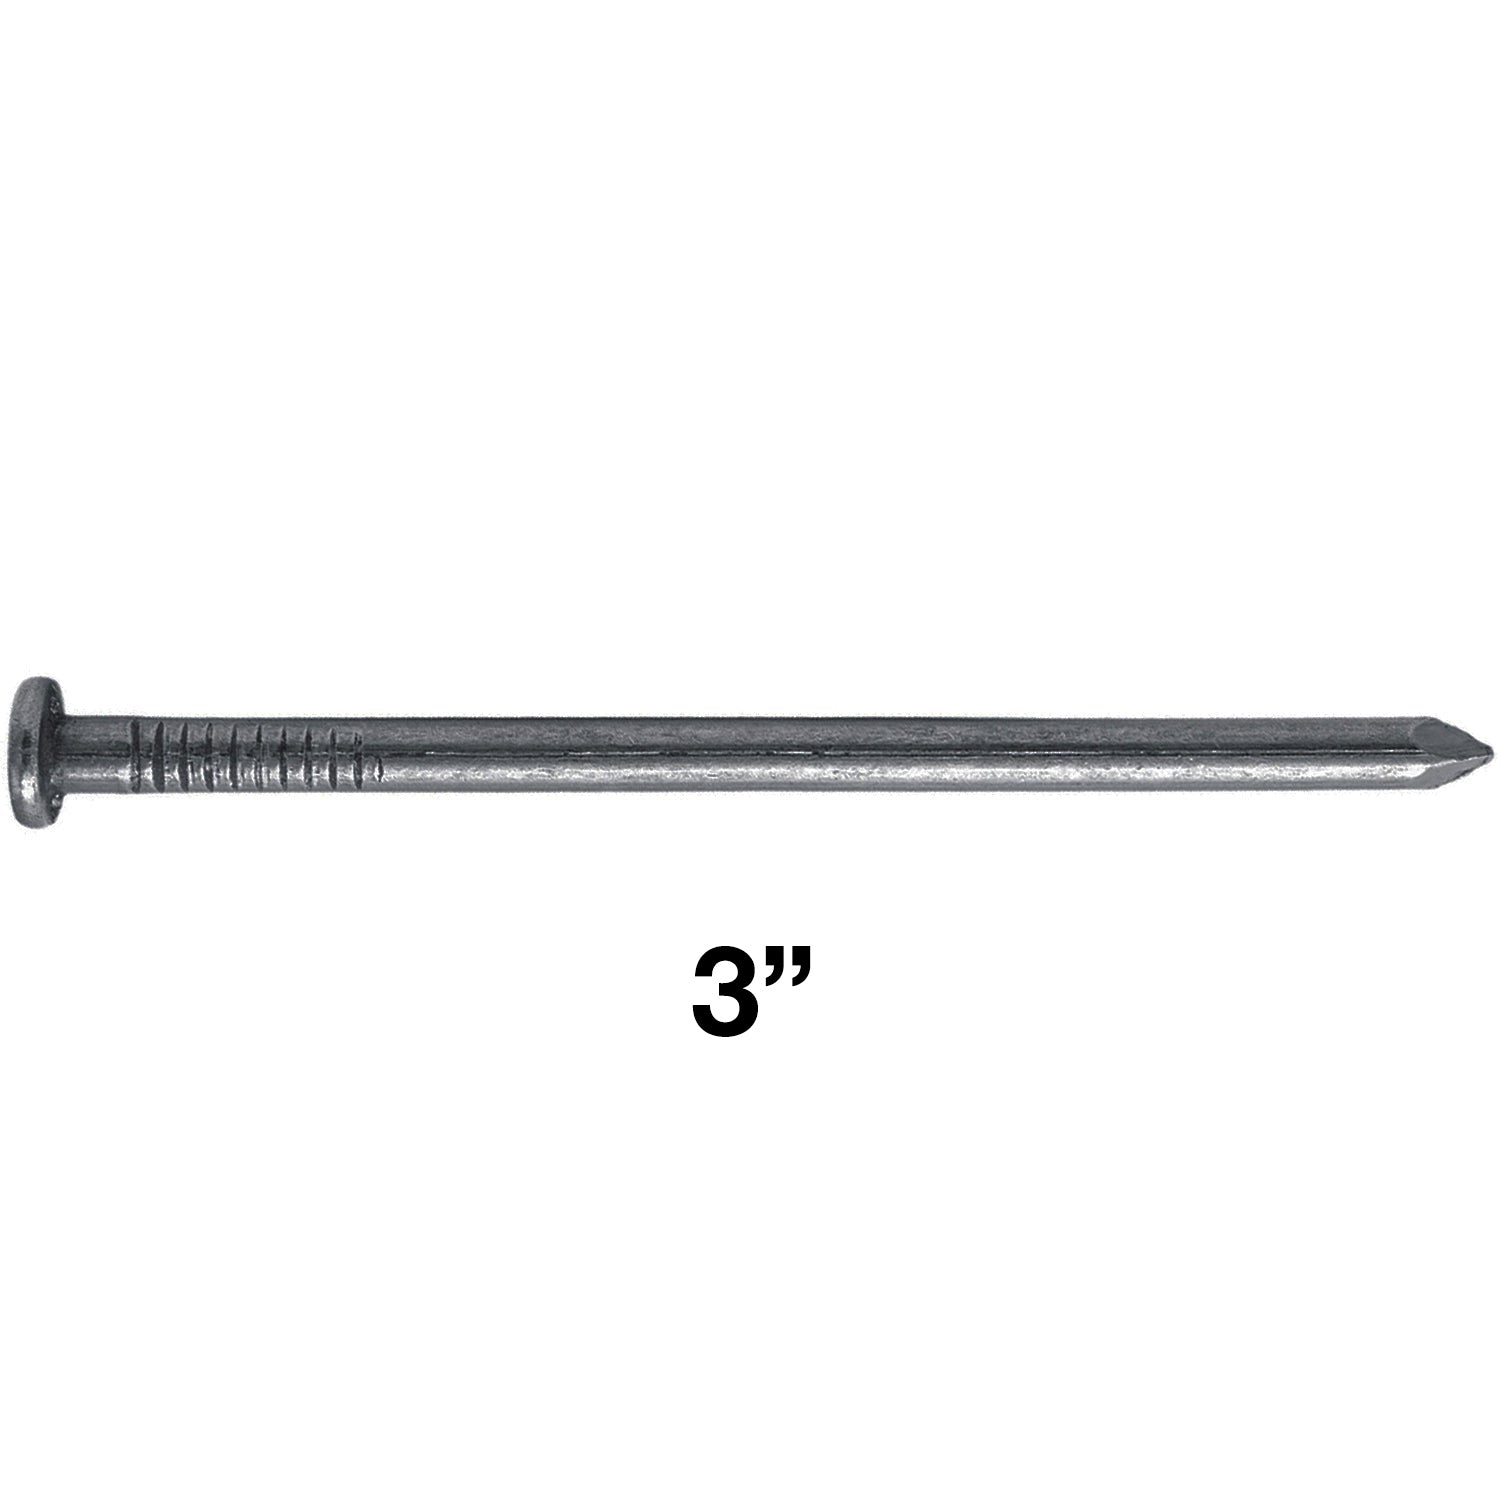 EISENSP 10 inch Galvanized Landscape Edging Spike - 30pcs Spiral Metal  Round Anchoring Stake for Paver Edging, Artificial Turf, Garden Landscape,  Weed Barrier, Trapping, Bright Spike Timber Nail : Amazon.ca: Patio, Lawn